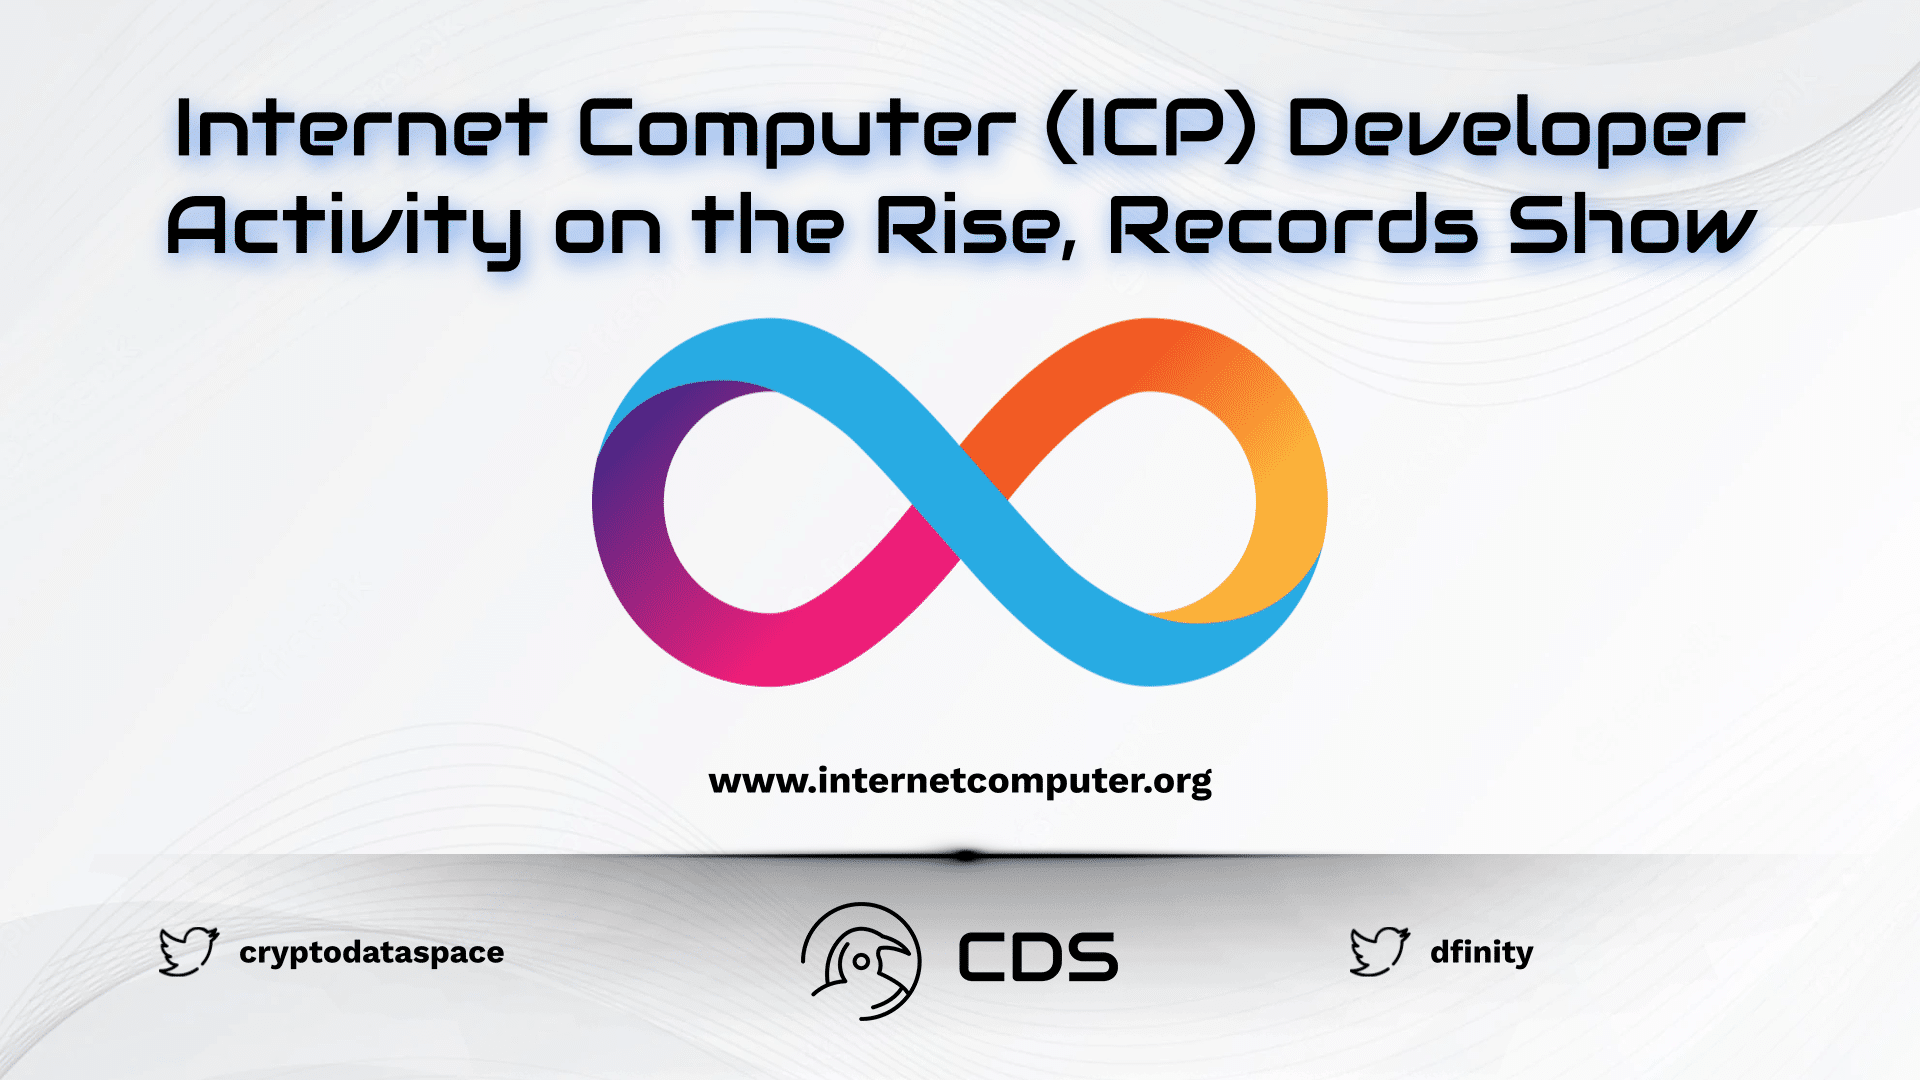 Internet Computer (ICP) Developer Activity on the Rise, Records Show